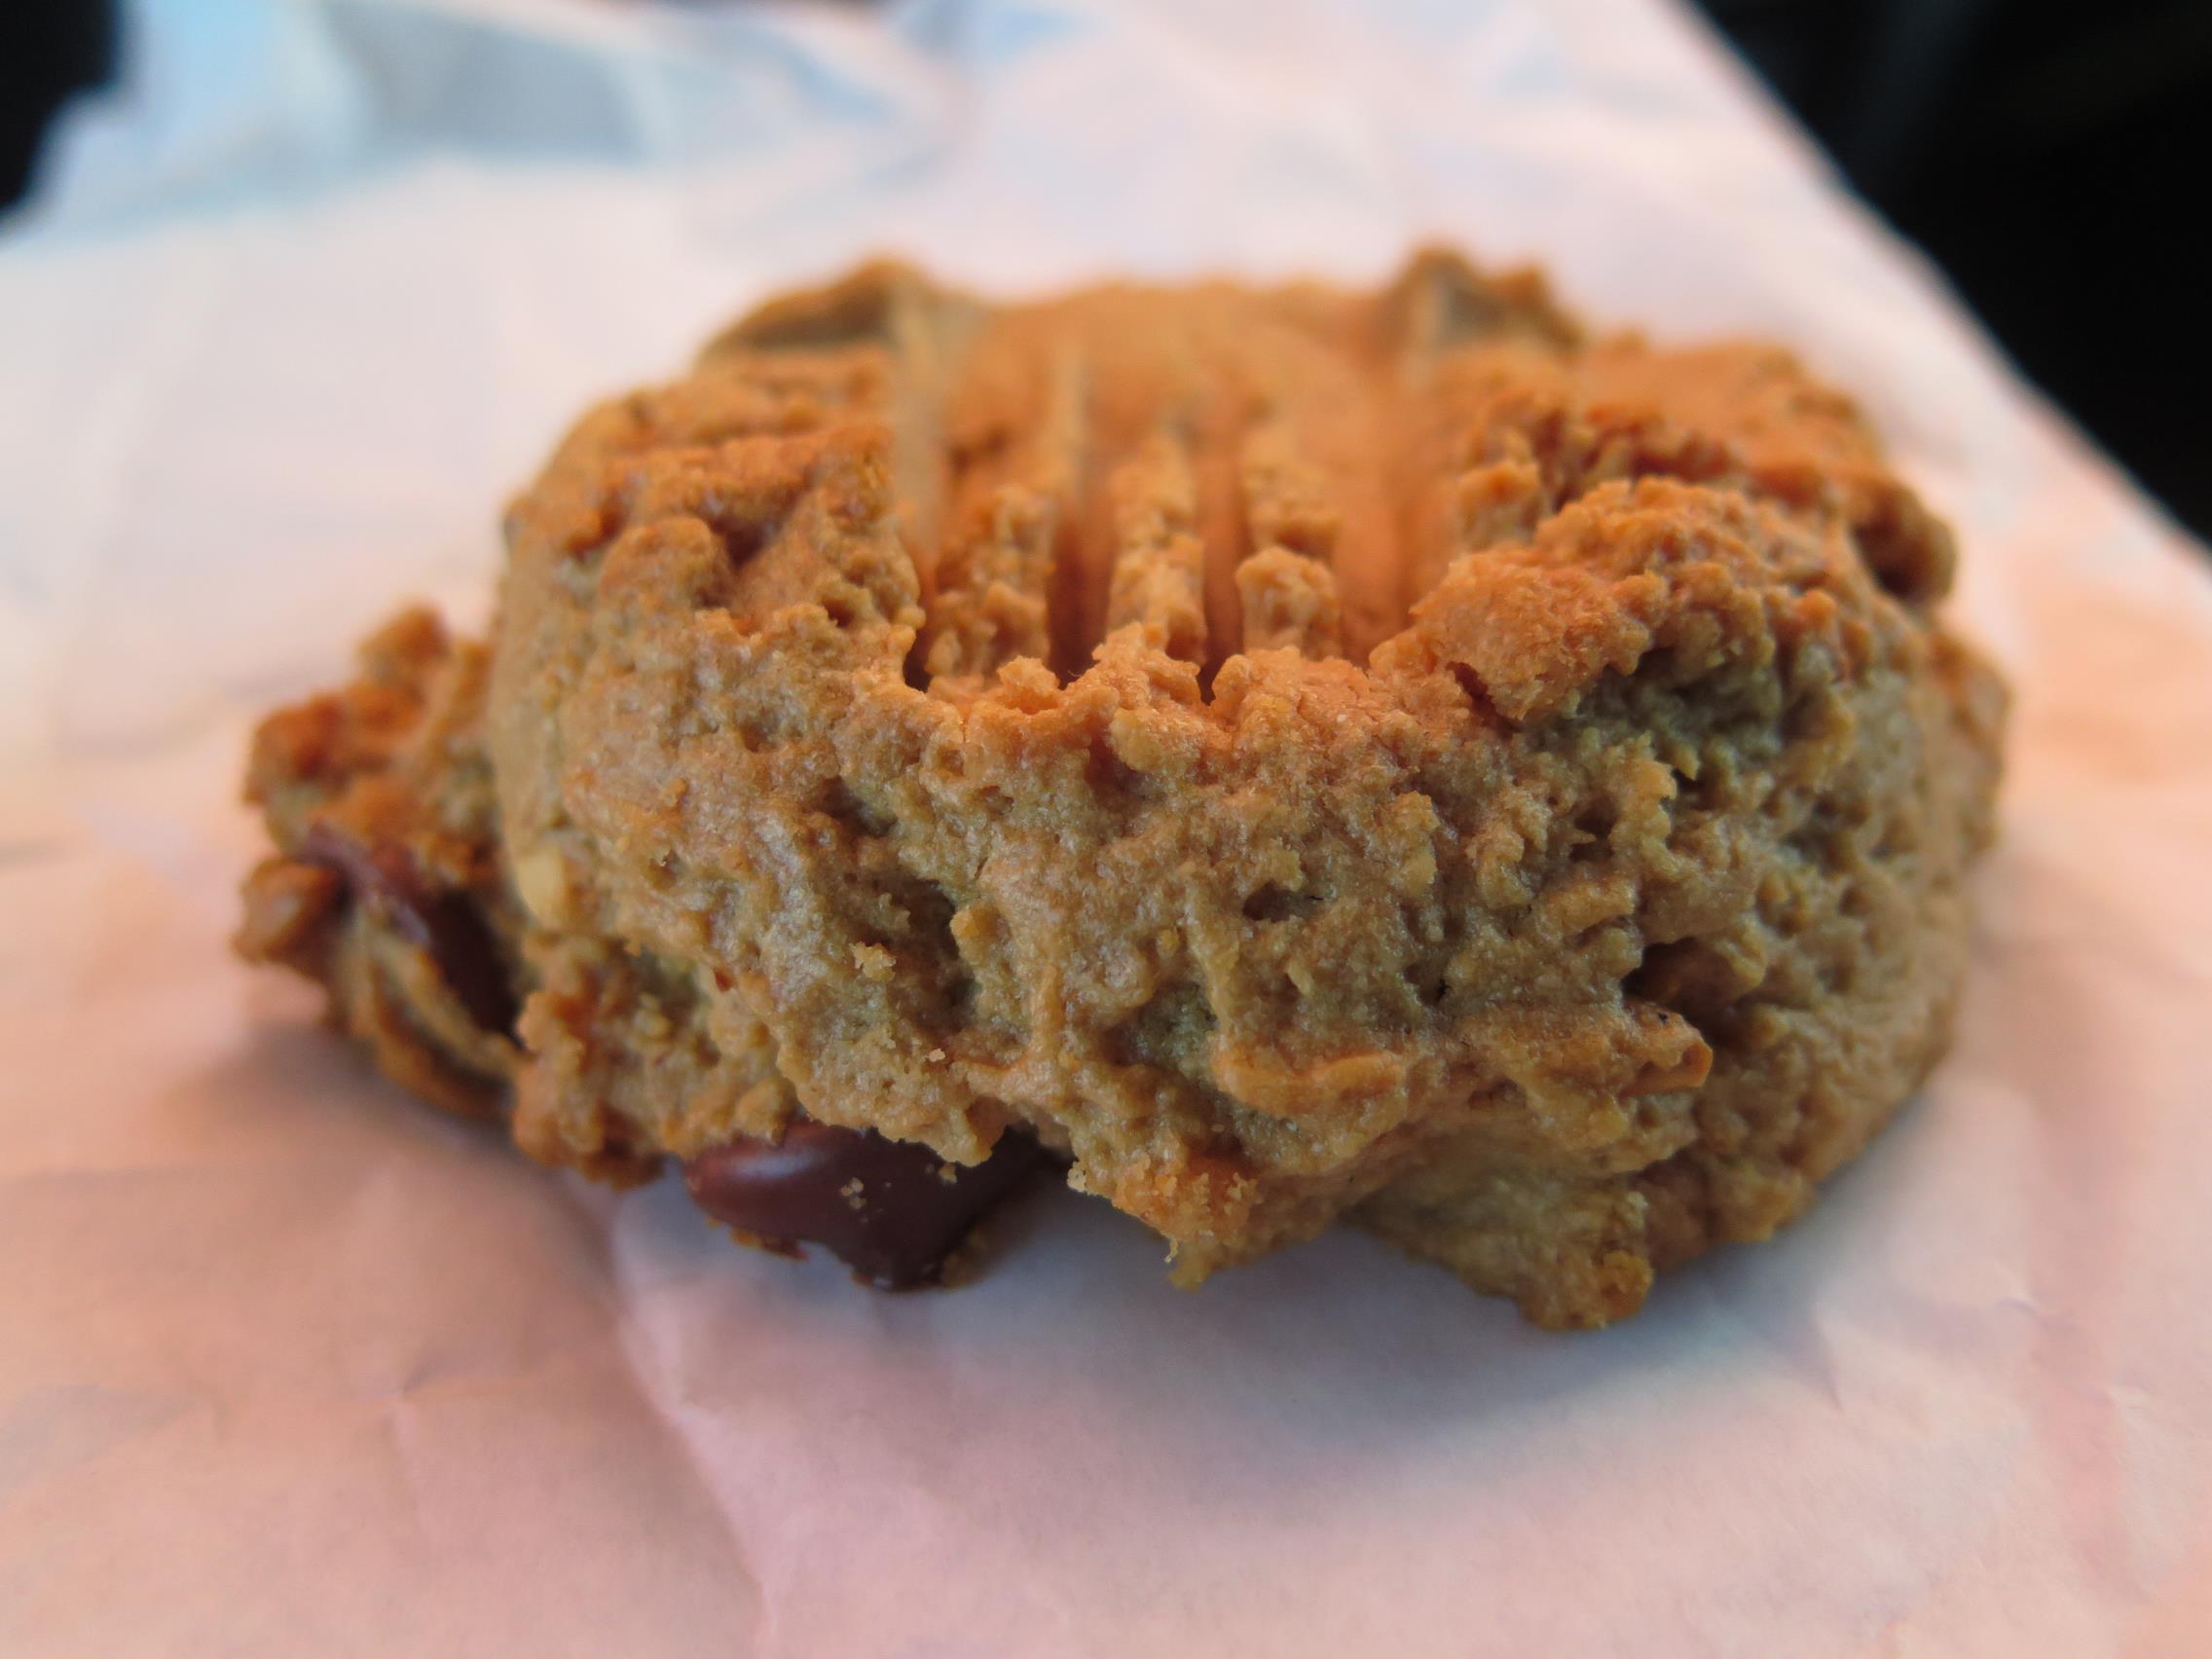 Inch-thick, rugged-texture cookie has creamy insides